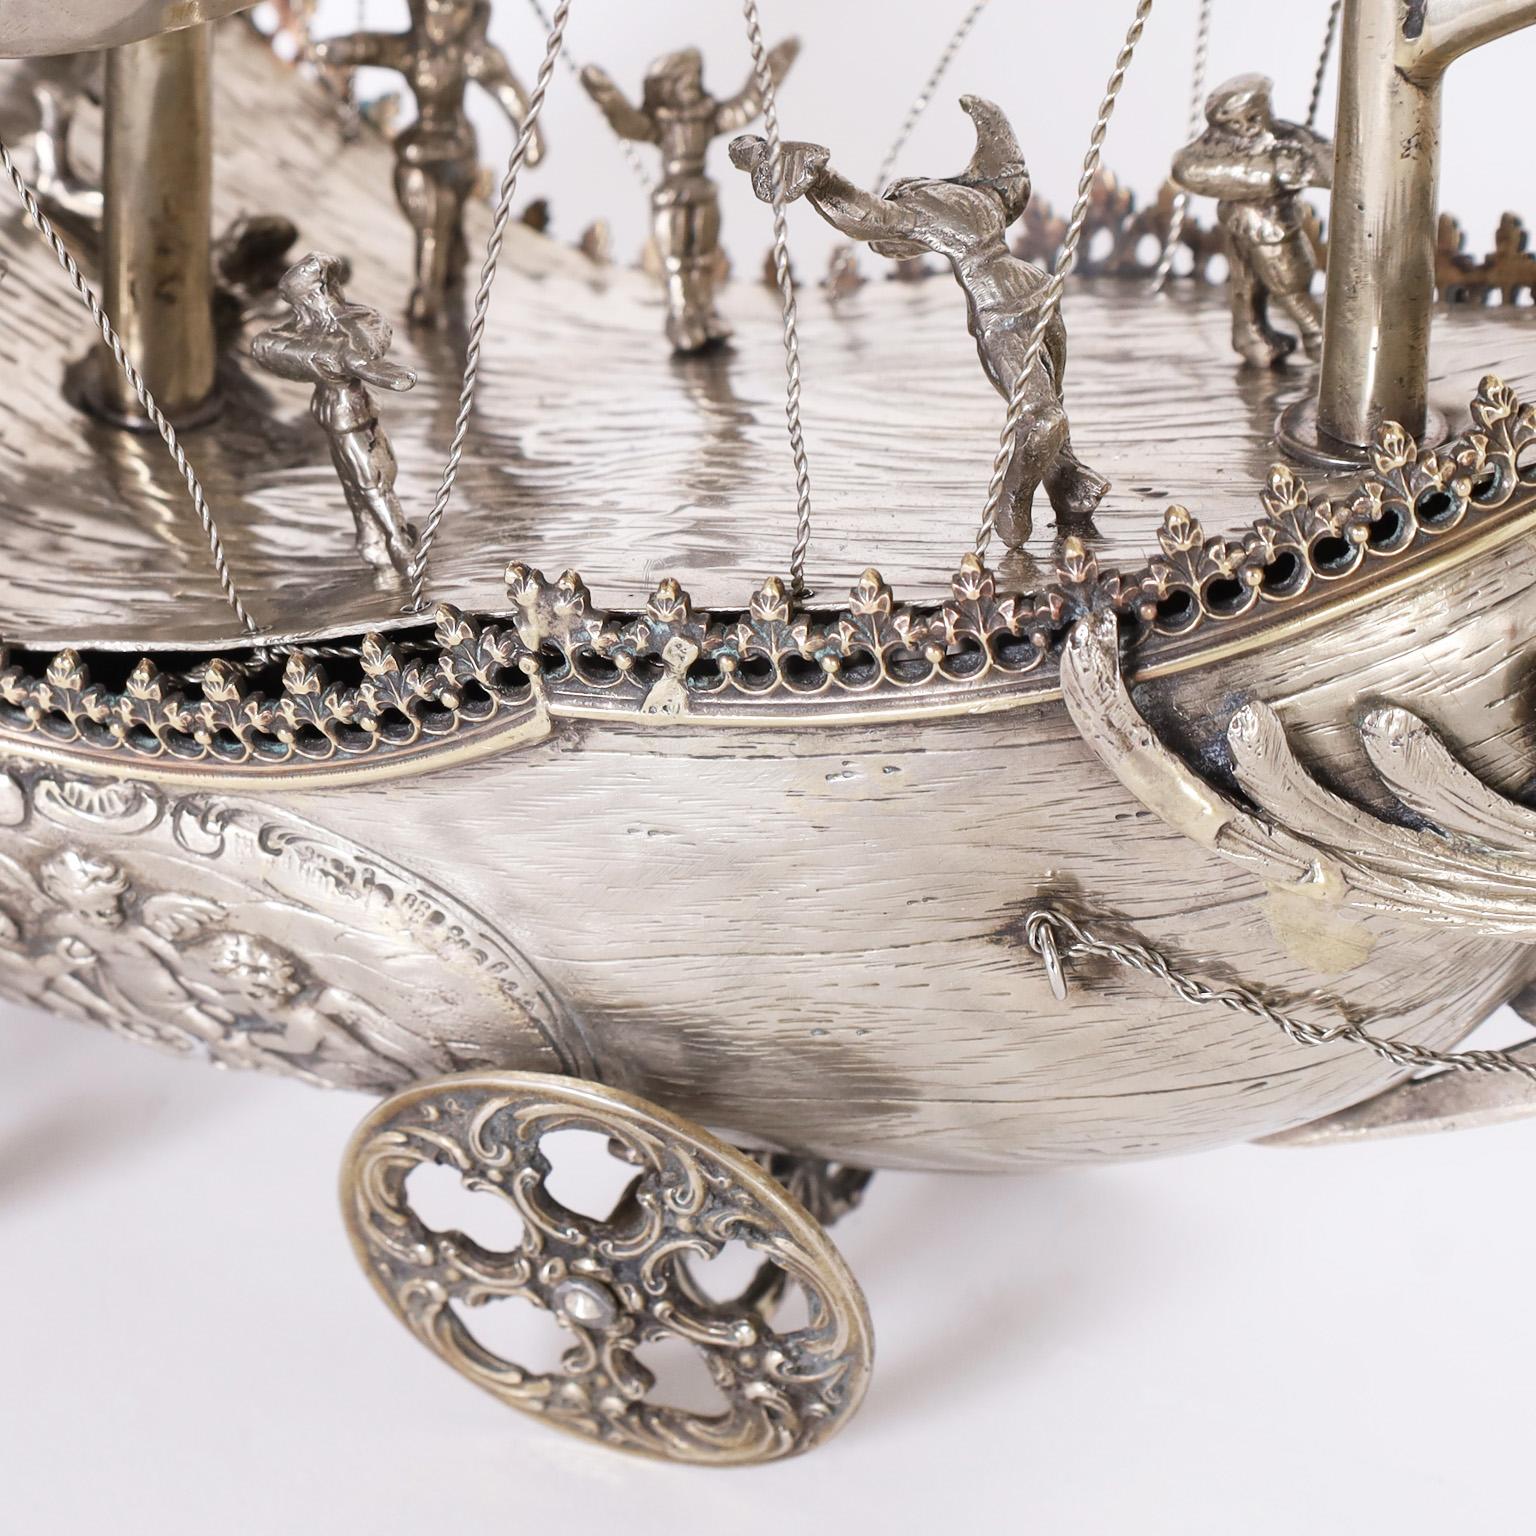 Antique Italian Silver on Brass Sailing Ship on Wheels For Sale 2